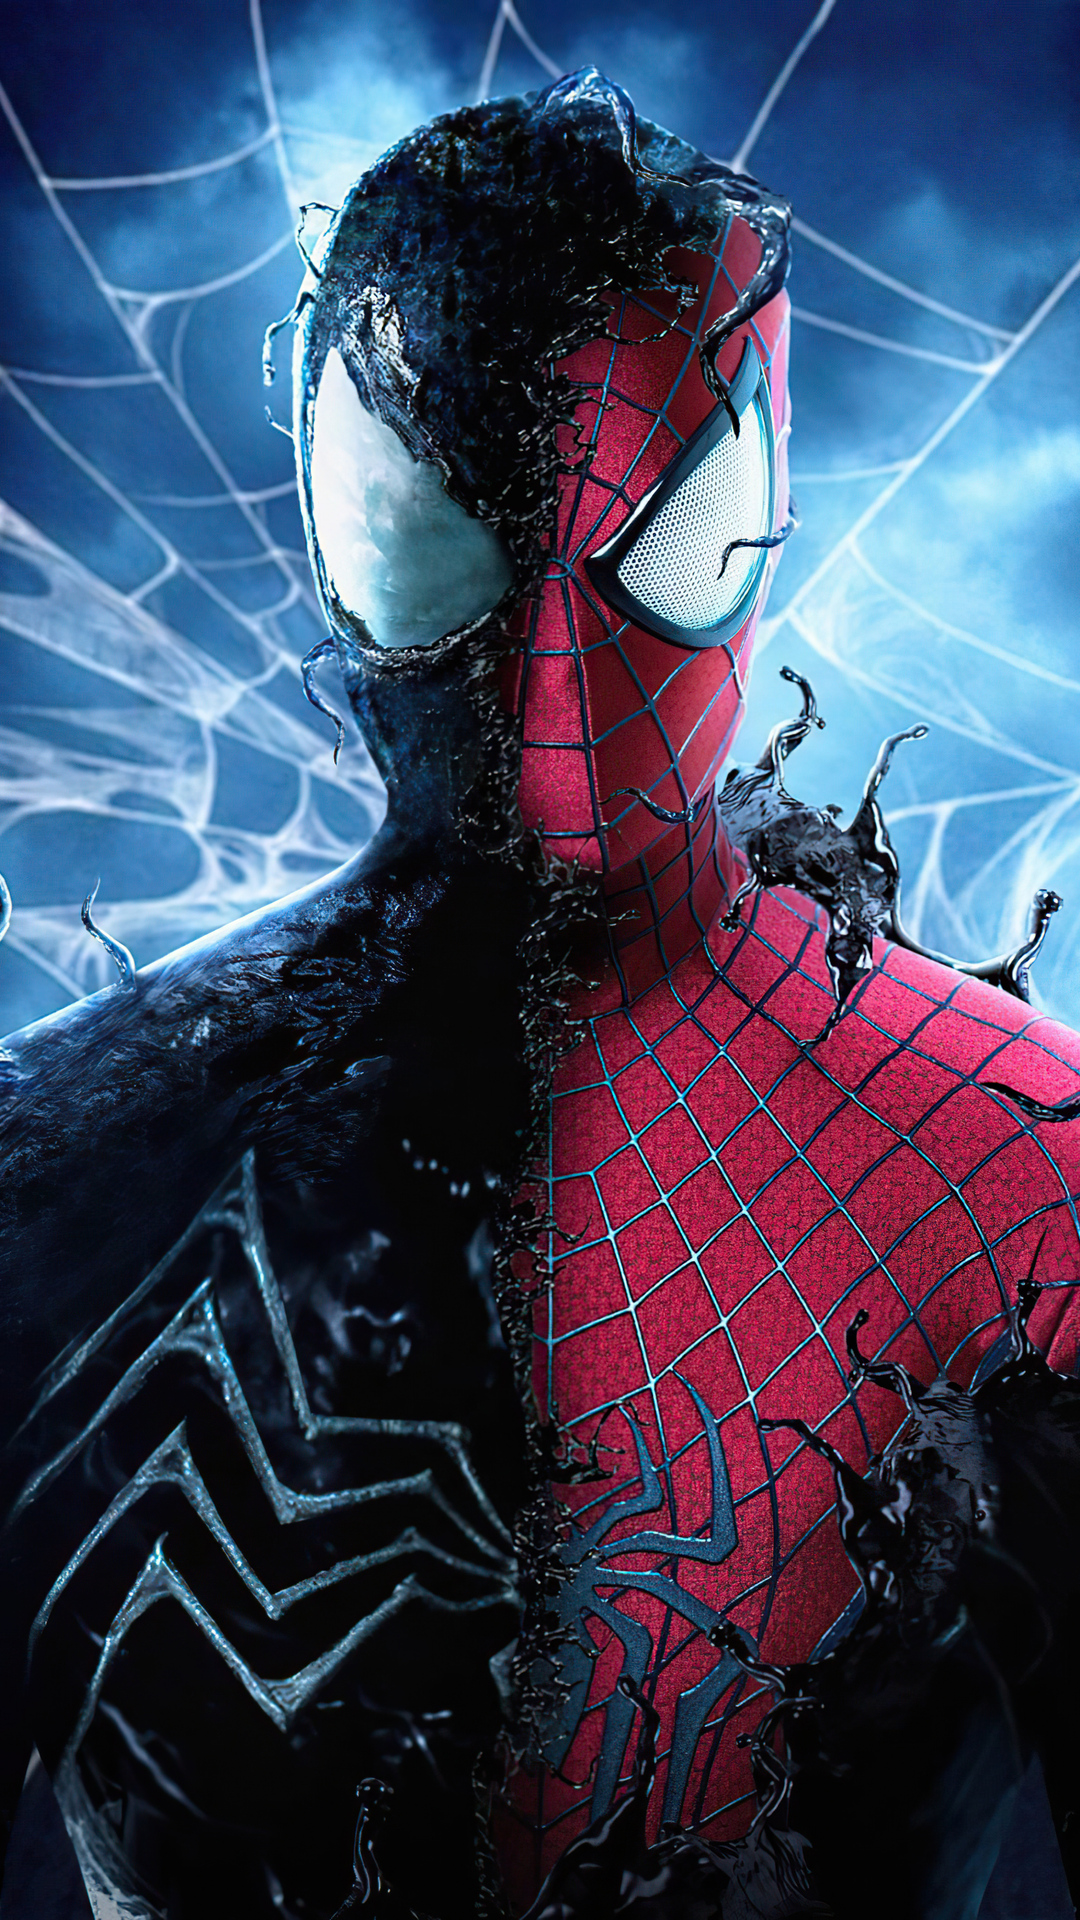 1080x1920 Spider Man With The Symbiote 4k Iphone 7,6s,6 Plus, Pixel xl ,One...